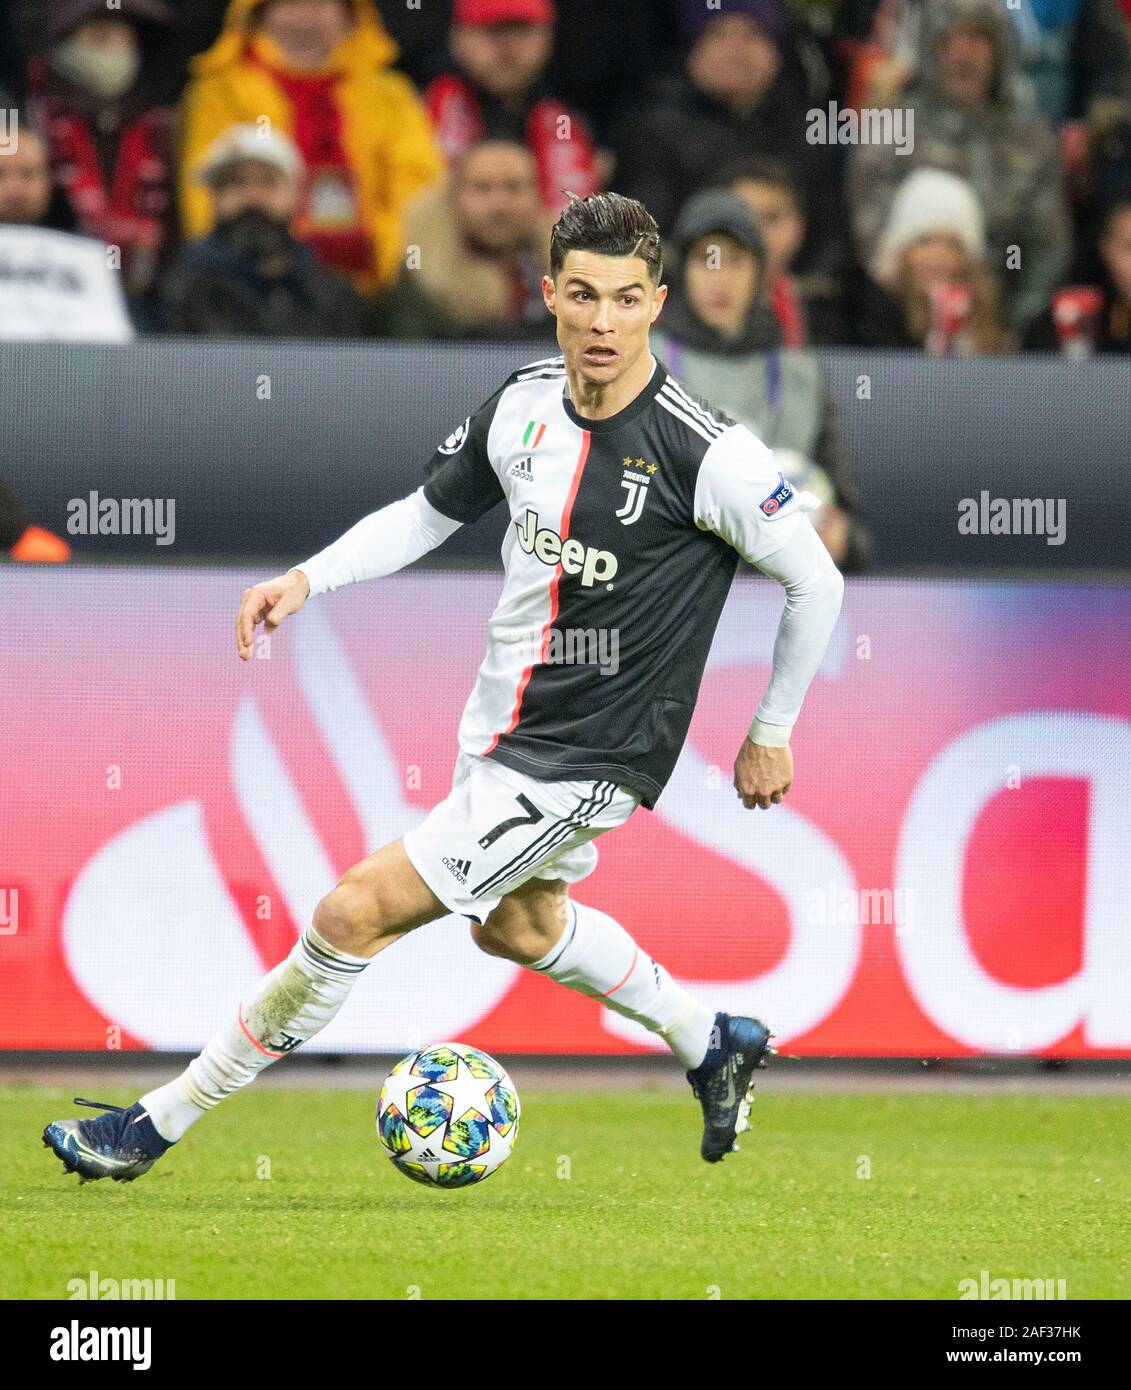 Cristiano RONALDO (Juve) Promotion, Football Champions League, Preliminary  Round, 6th matchday Group D, Bayer 04 Leverkusen (LEV) - Juventus (Juve) 0:  2, on 11.12.2019 in Leverkusen / Germany. | Usage worldwide Stock Photo -  Alamy